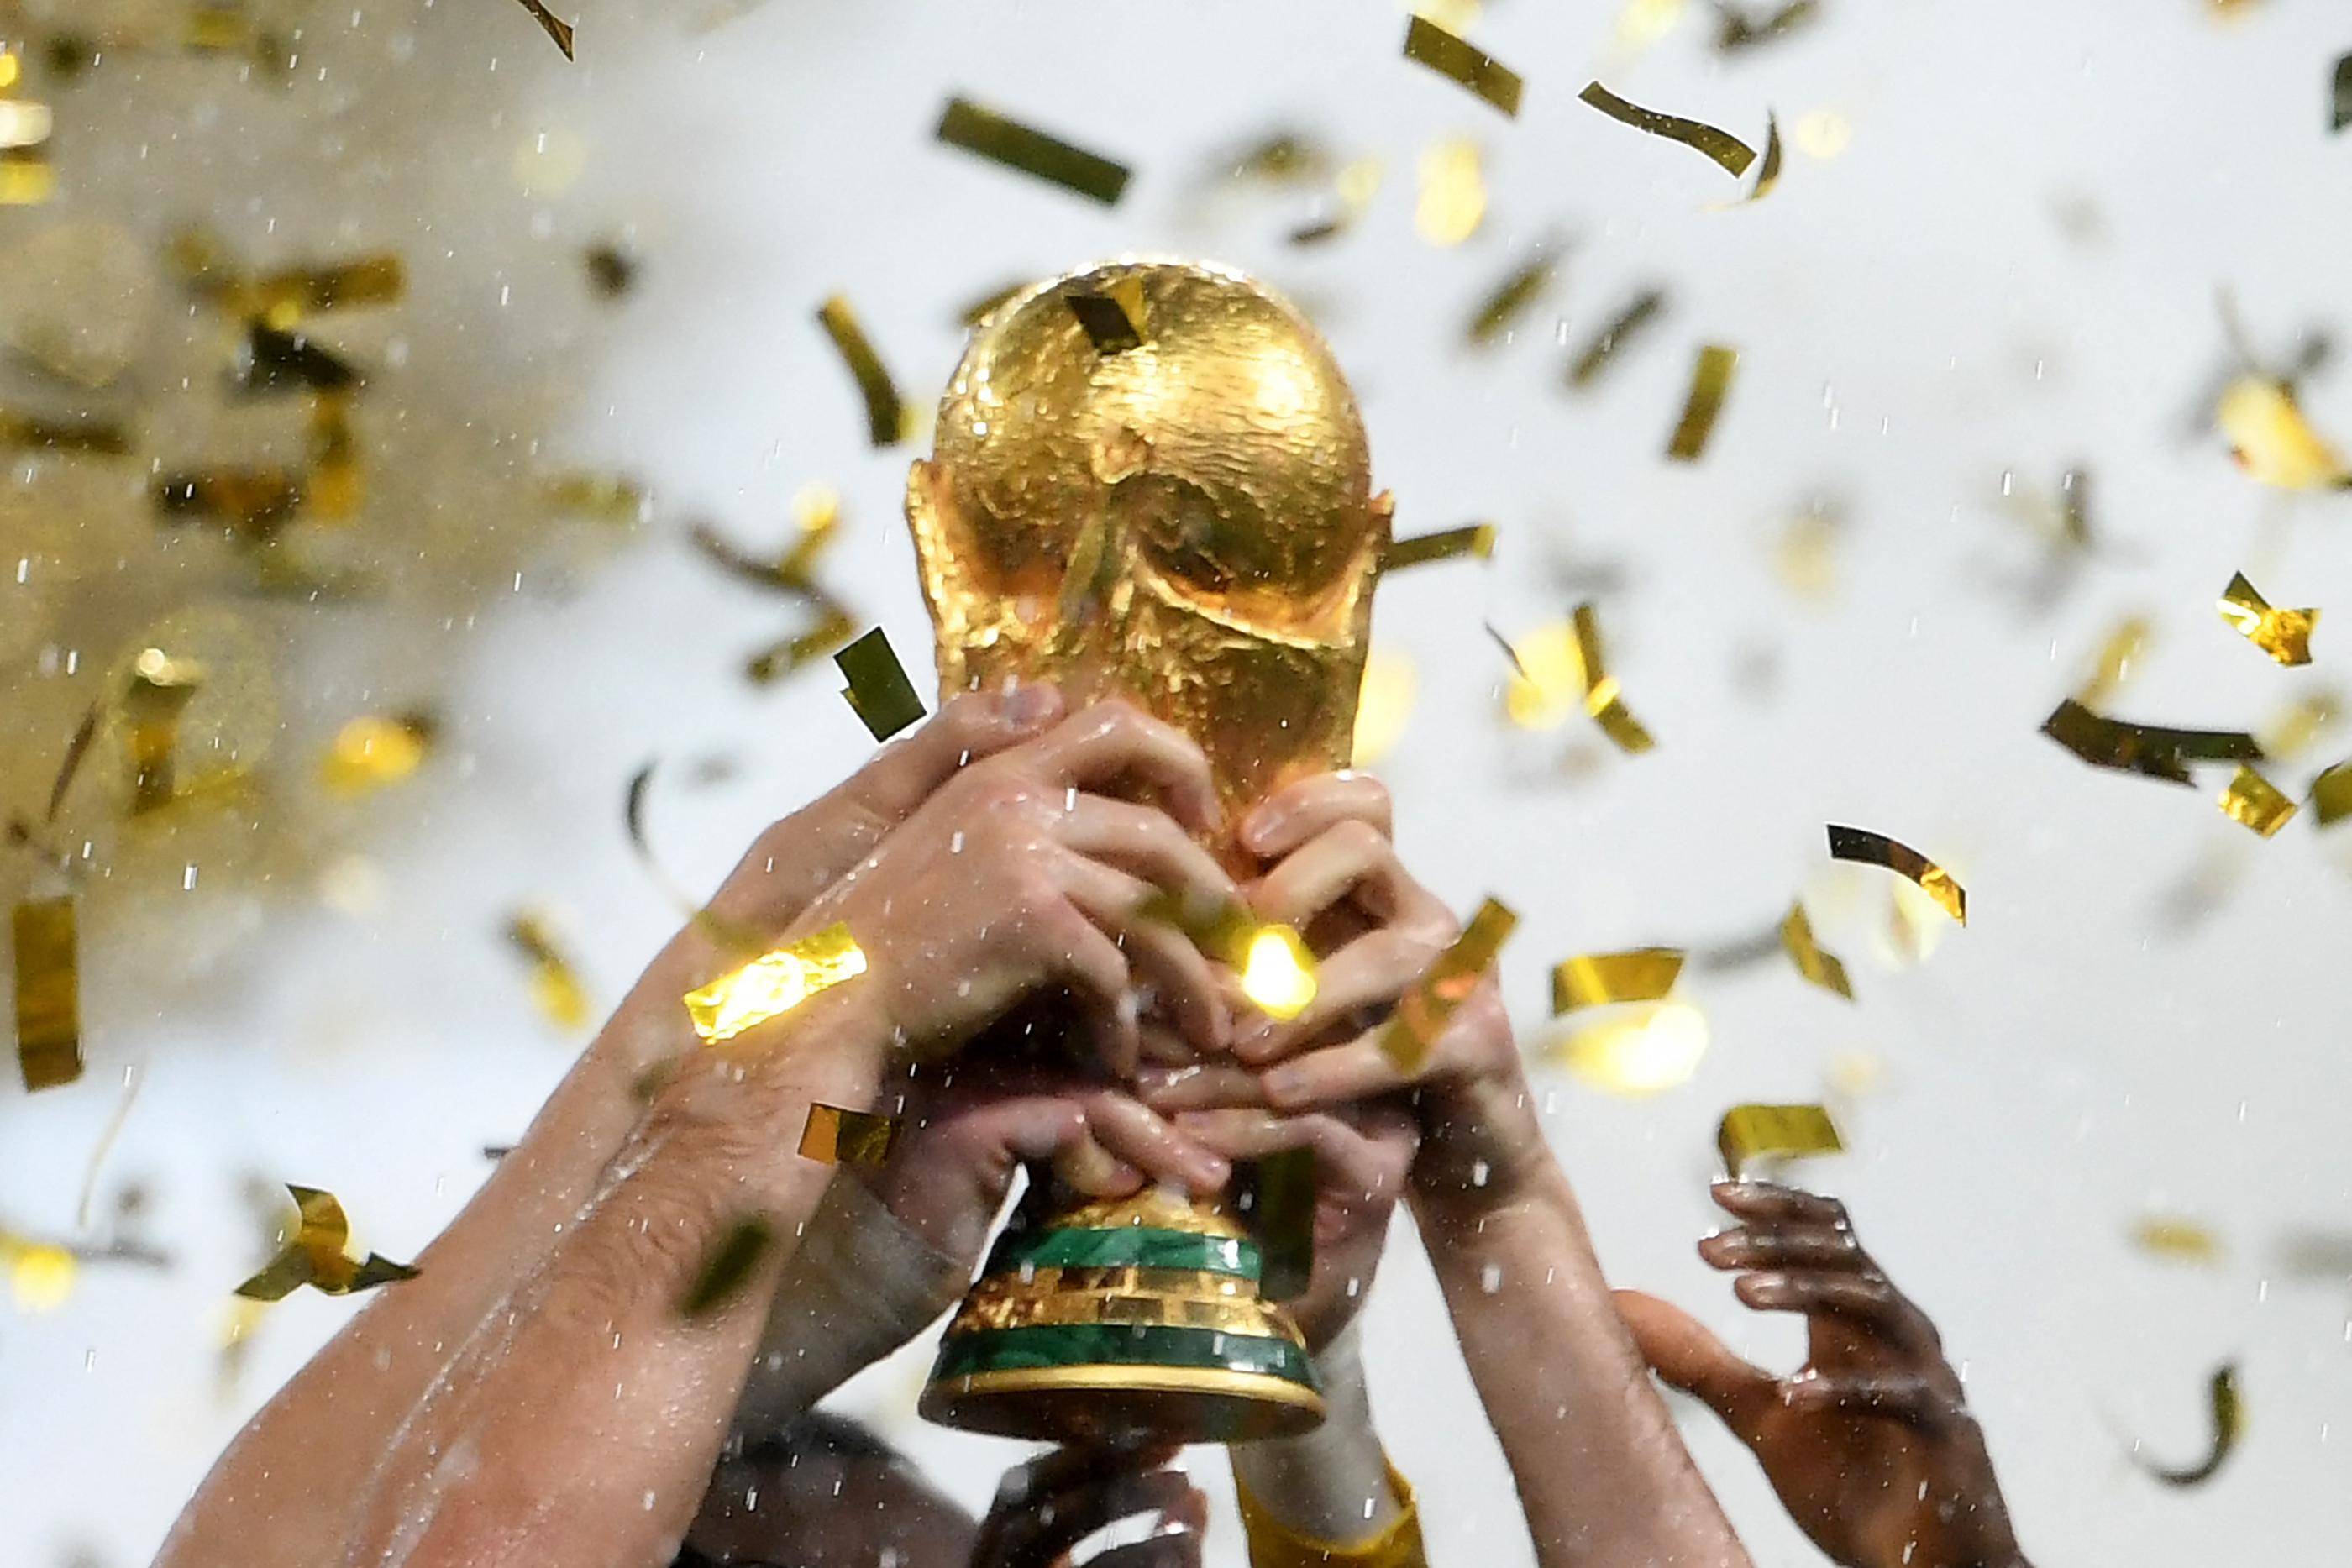 Qatar to require fans at 2022 World Cup to be vaccinated - News ...